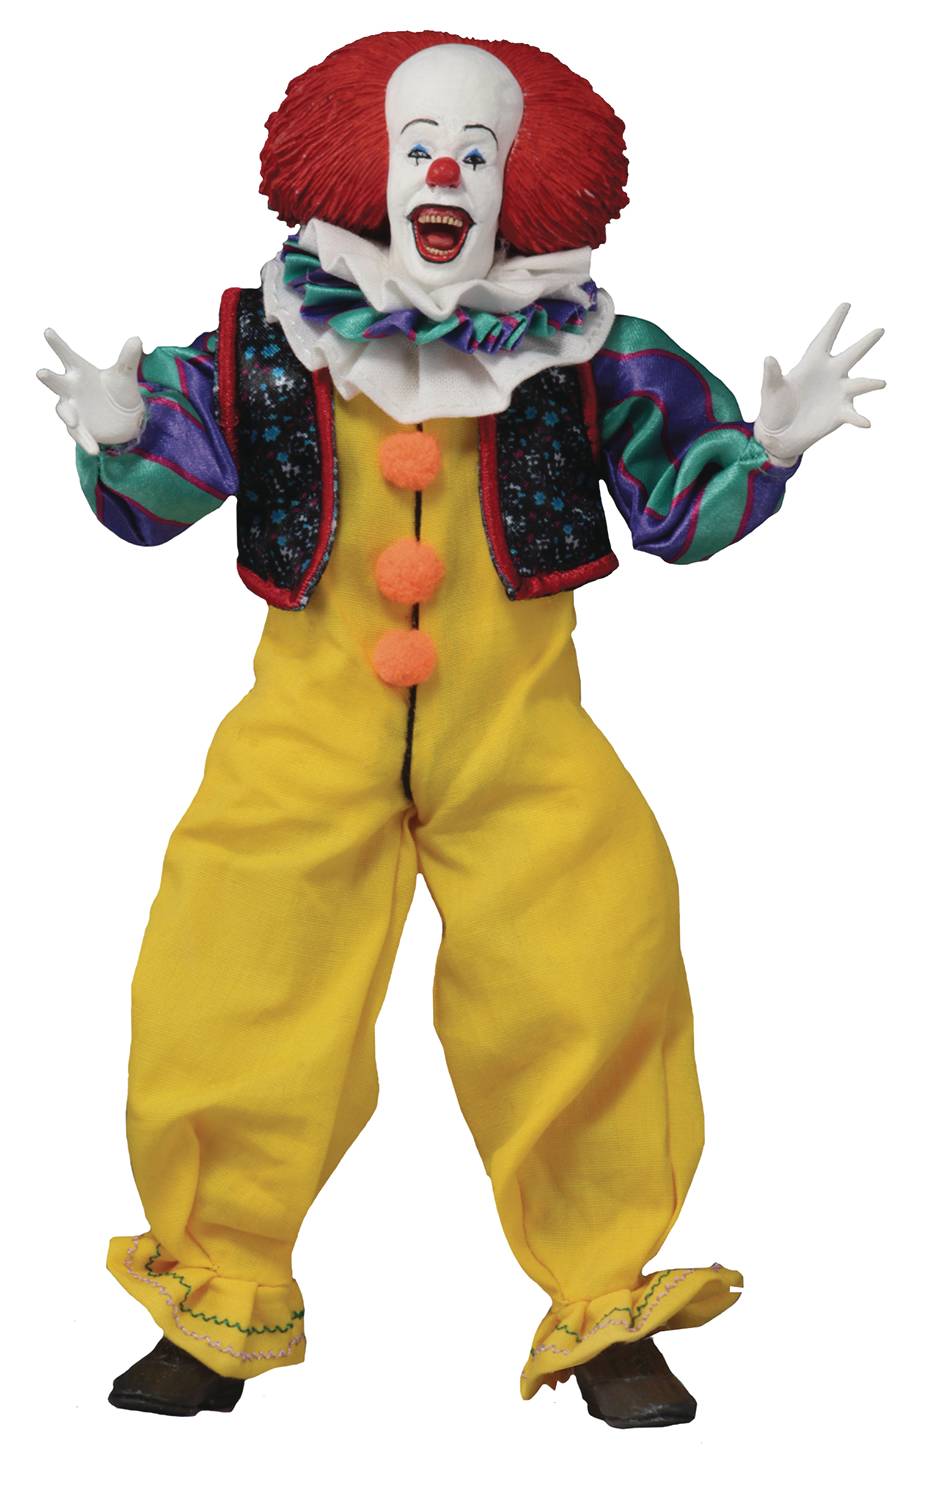 neca clothed pennywise